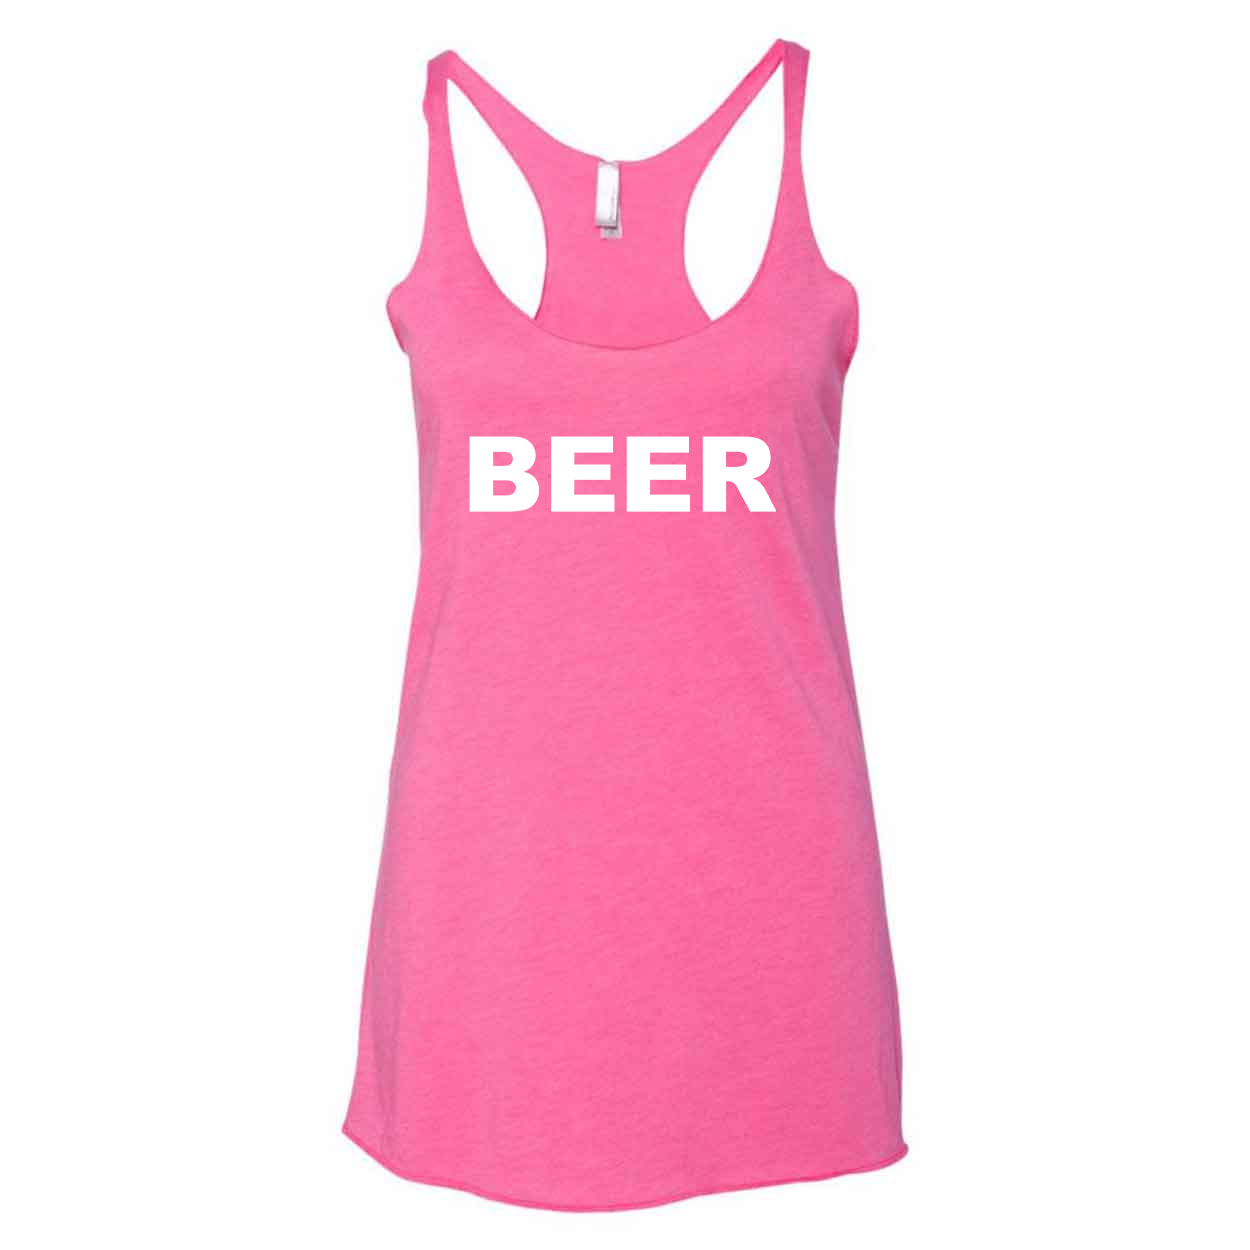 Beer Brand Logo Classic Women's Ultra Thin Tank Top Vintage Pink 